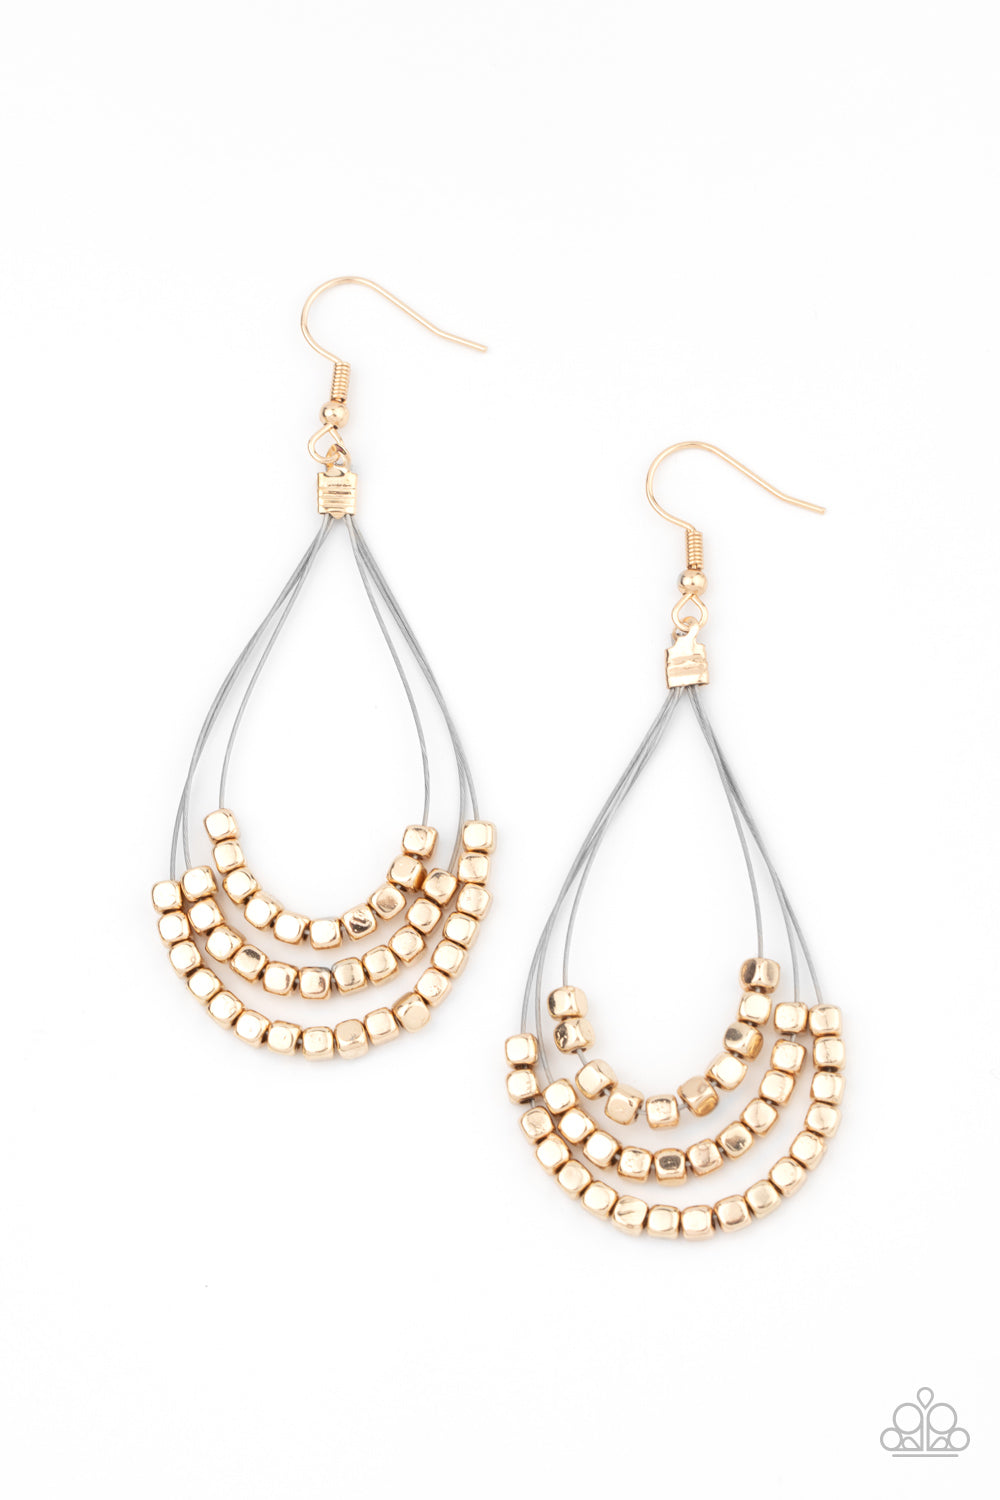 Off The Blocks Shimmer - Gold Earrings - Princess Glam Shop